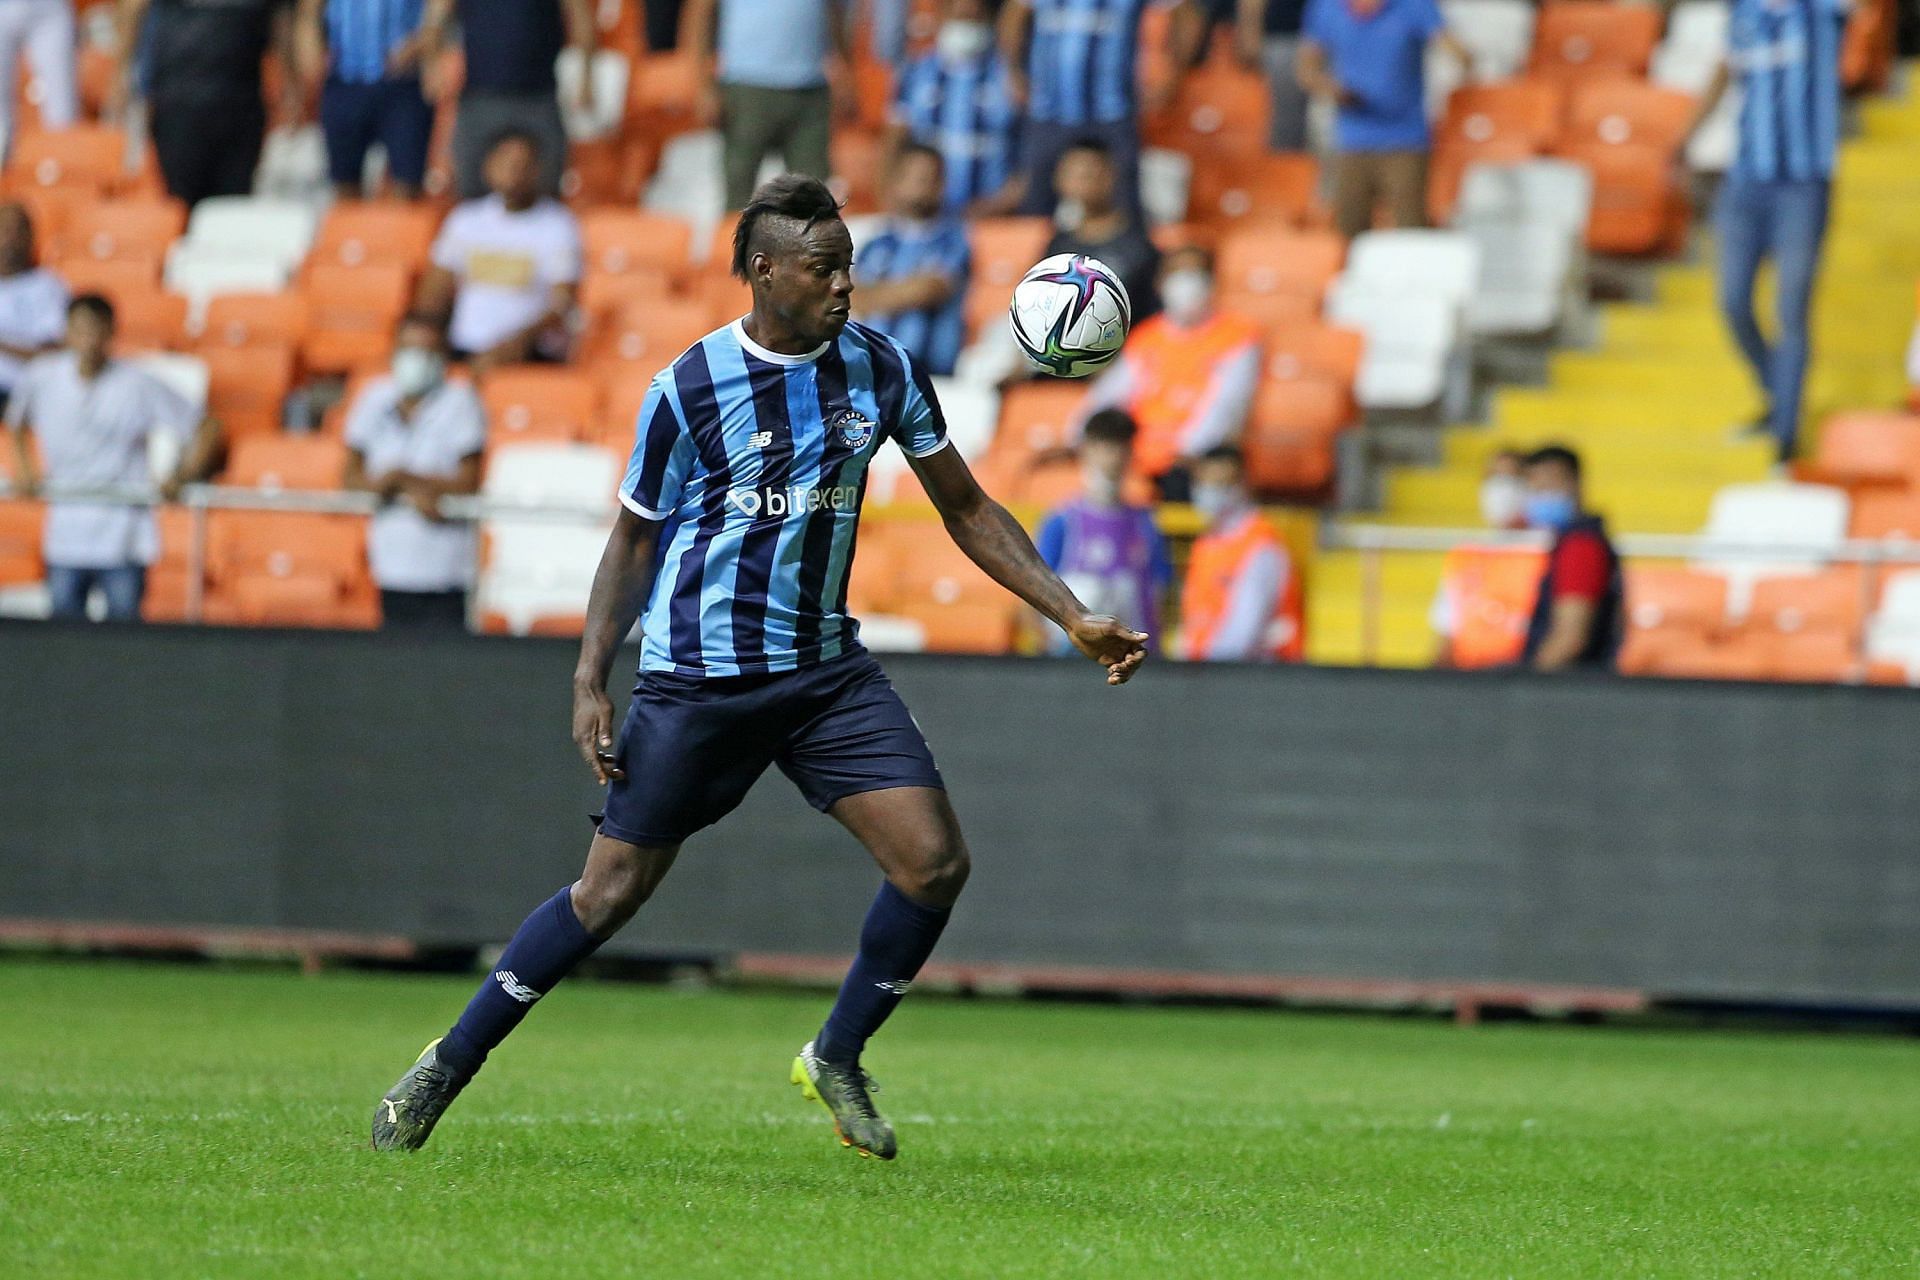 Mario Balotelli in action for Adana Demirspor (pic cred: Daily Sabah)